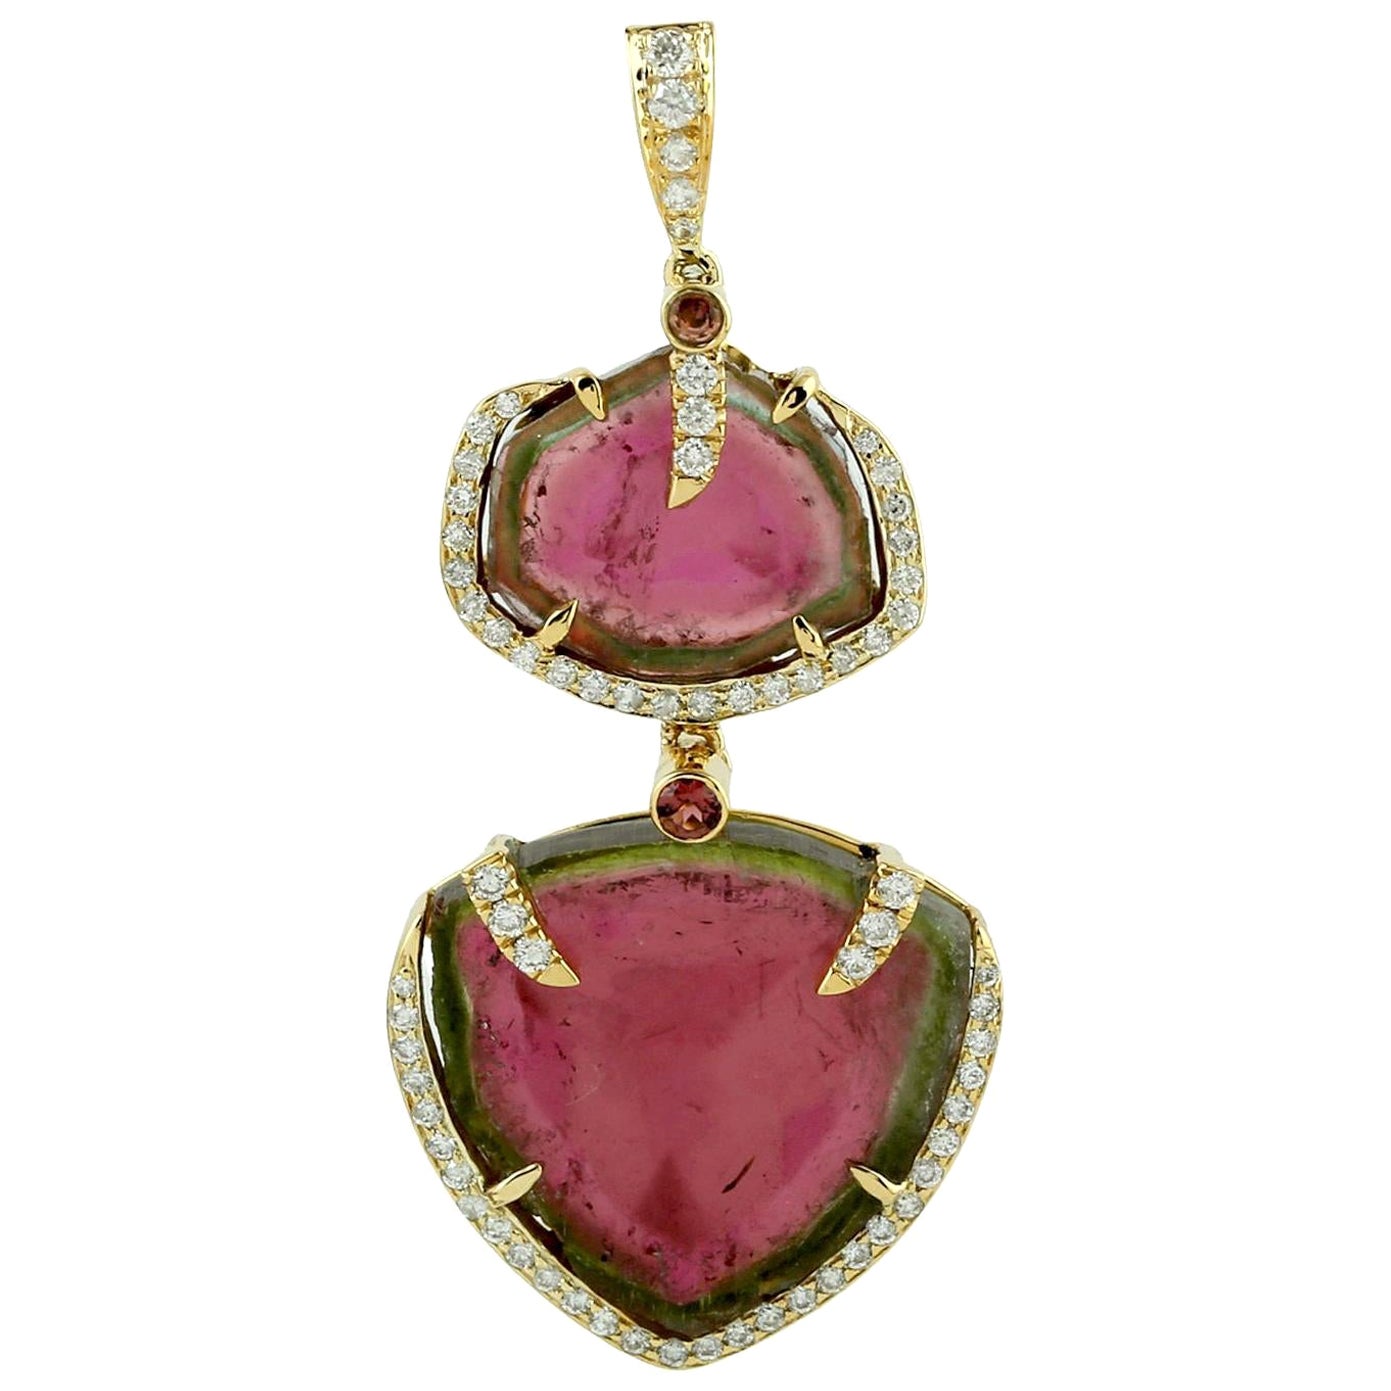 Sliced & Rose Cut Watermelon Tourmaline Pendant Made in 18k Yellow Gold